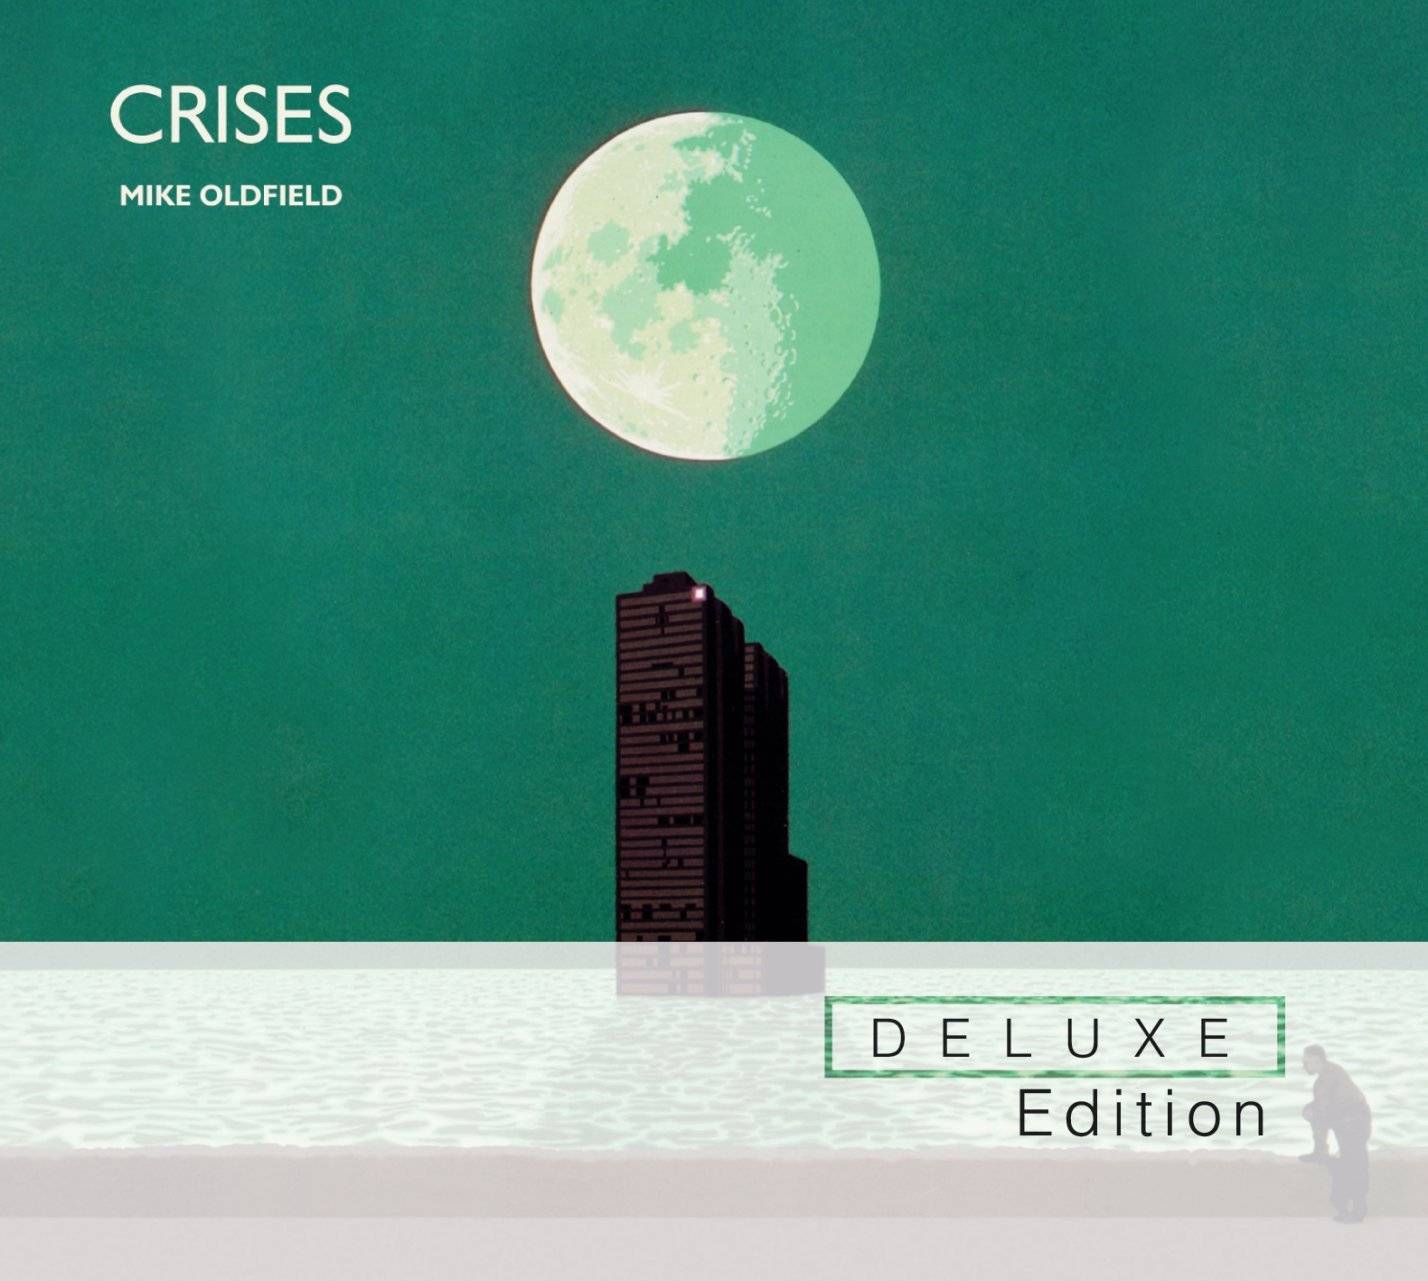 Mike Oldfield – Crises (Super Deluxe Edition 2013) (1983/2013) [Official Digital Download 24bit/96kHz]